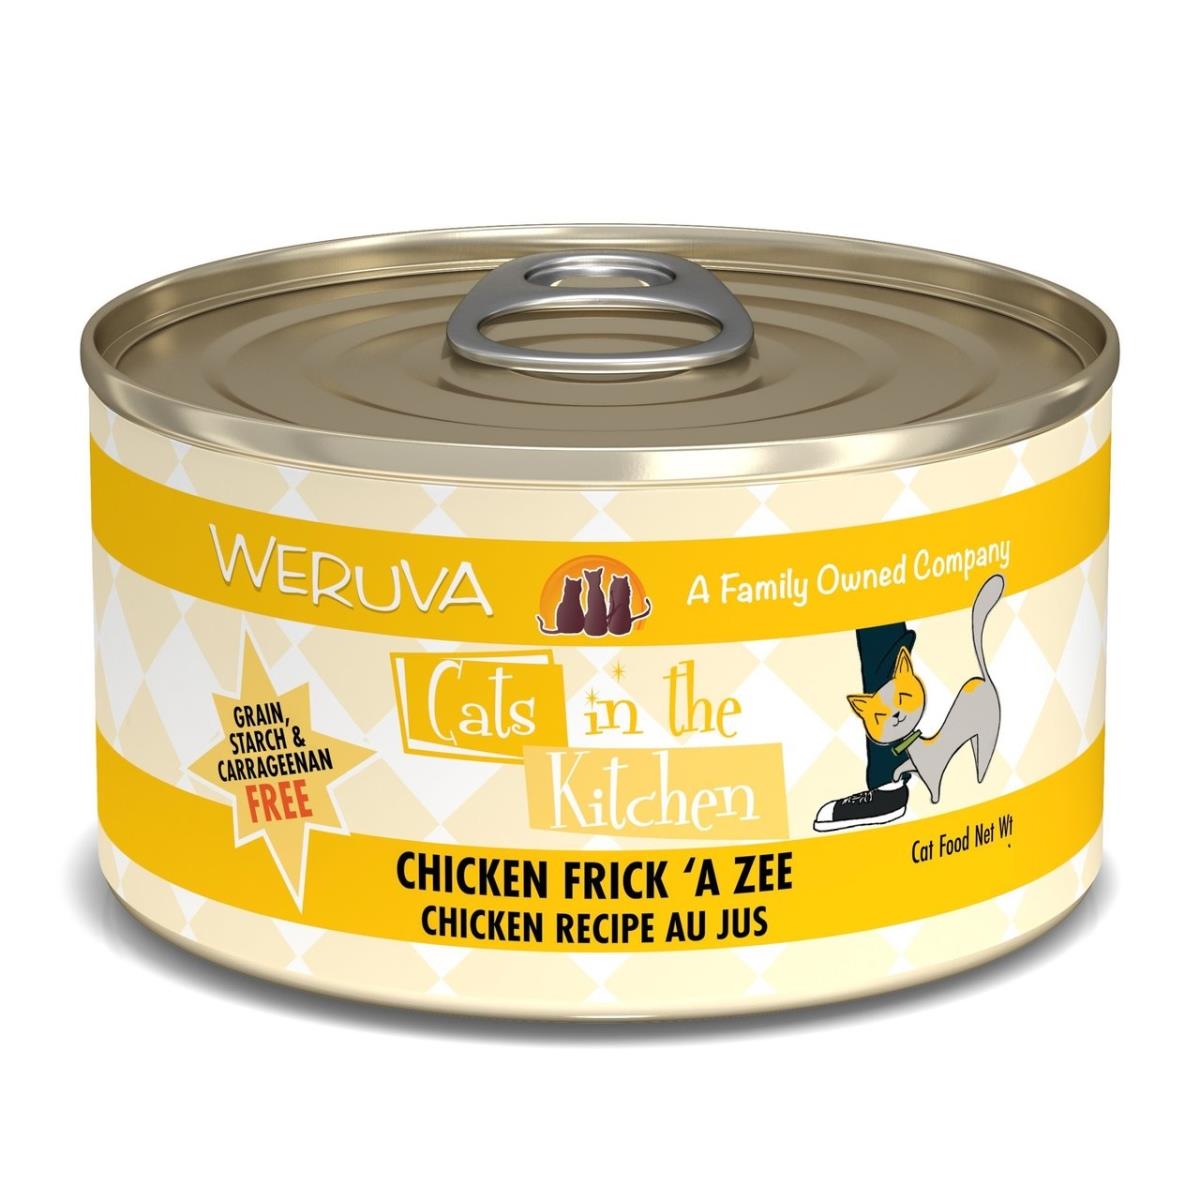 Wu00170 10 Oz The Kitchen Chicken Frick A Zee Cat Food - Case Of 12